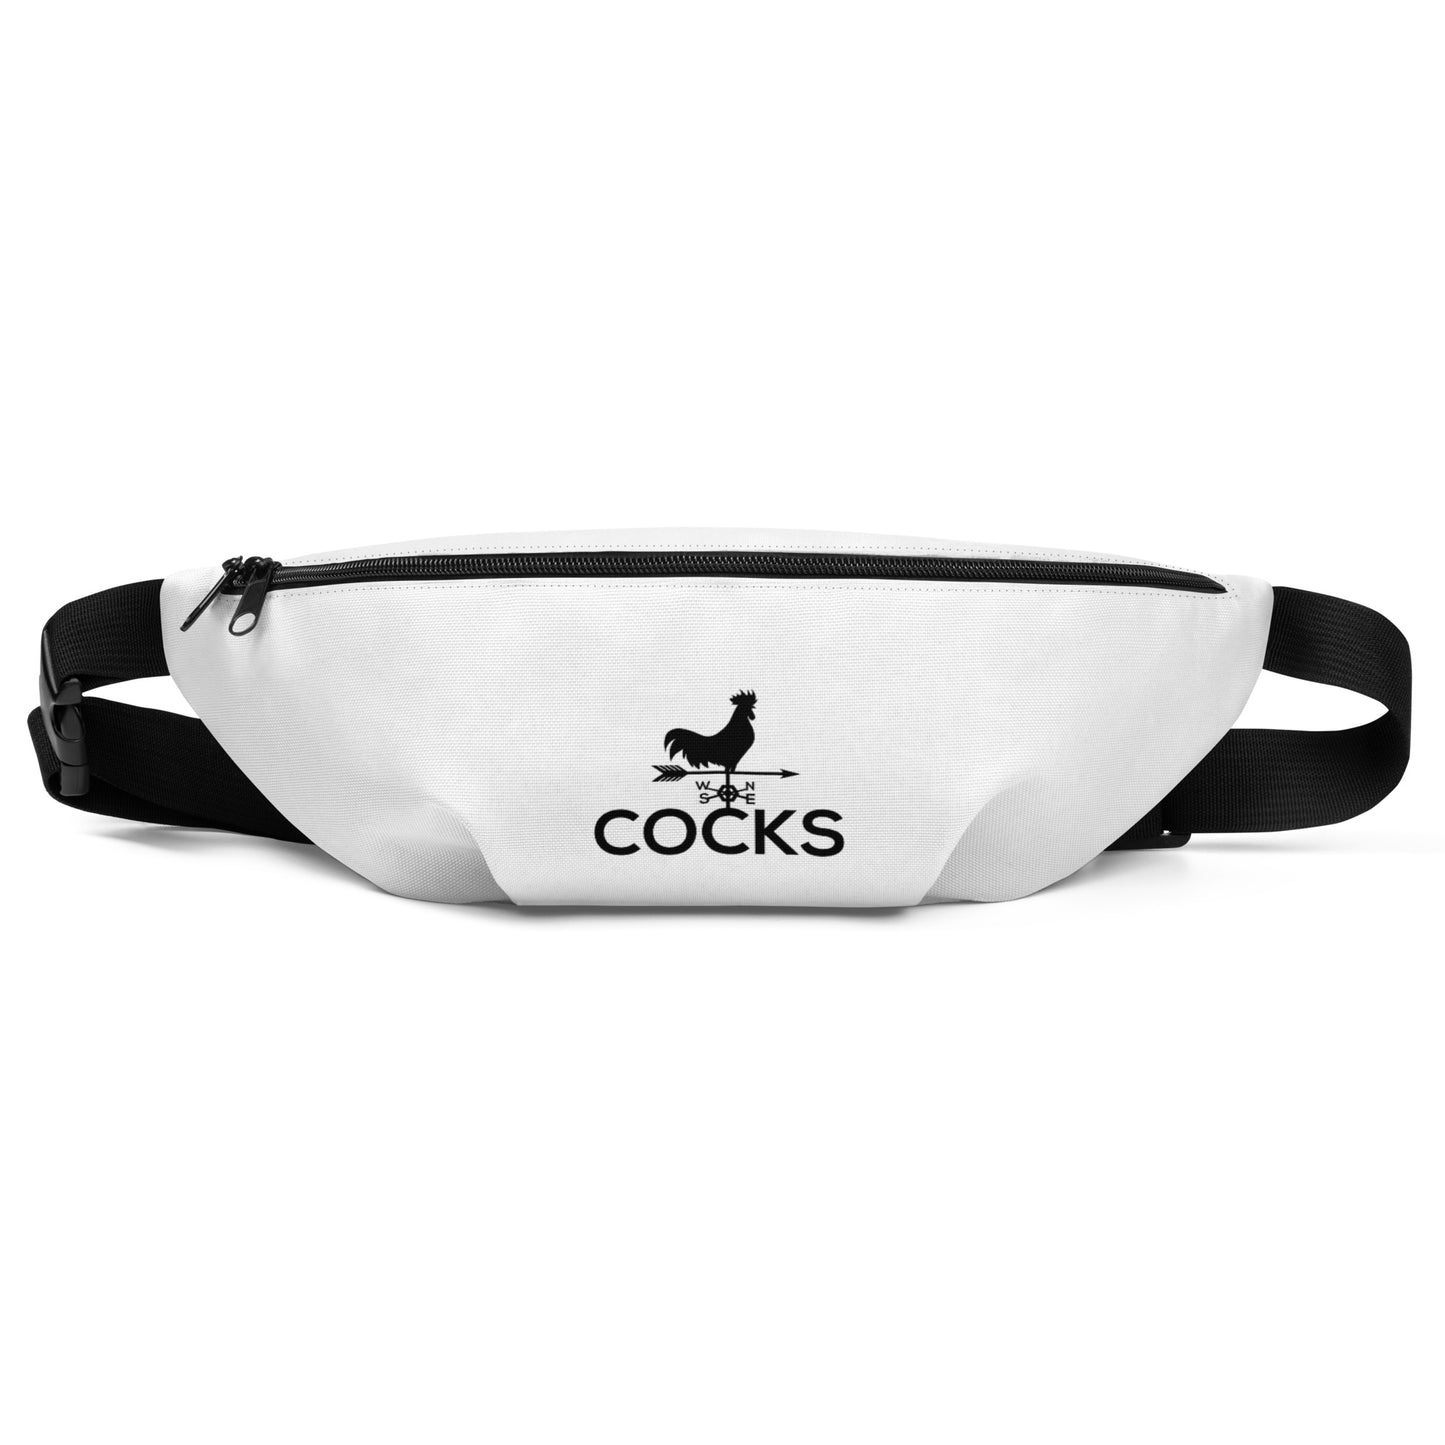 Cocks Fanny Pack